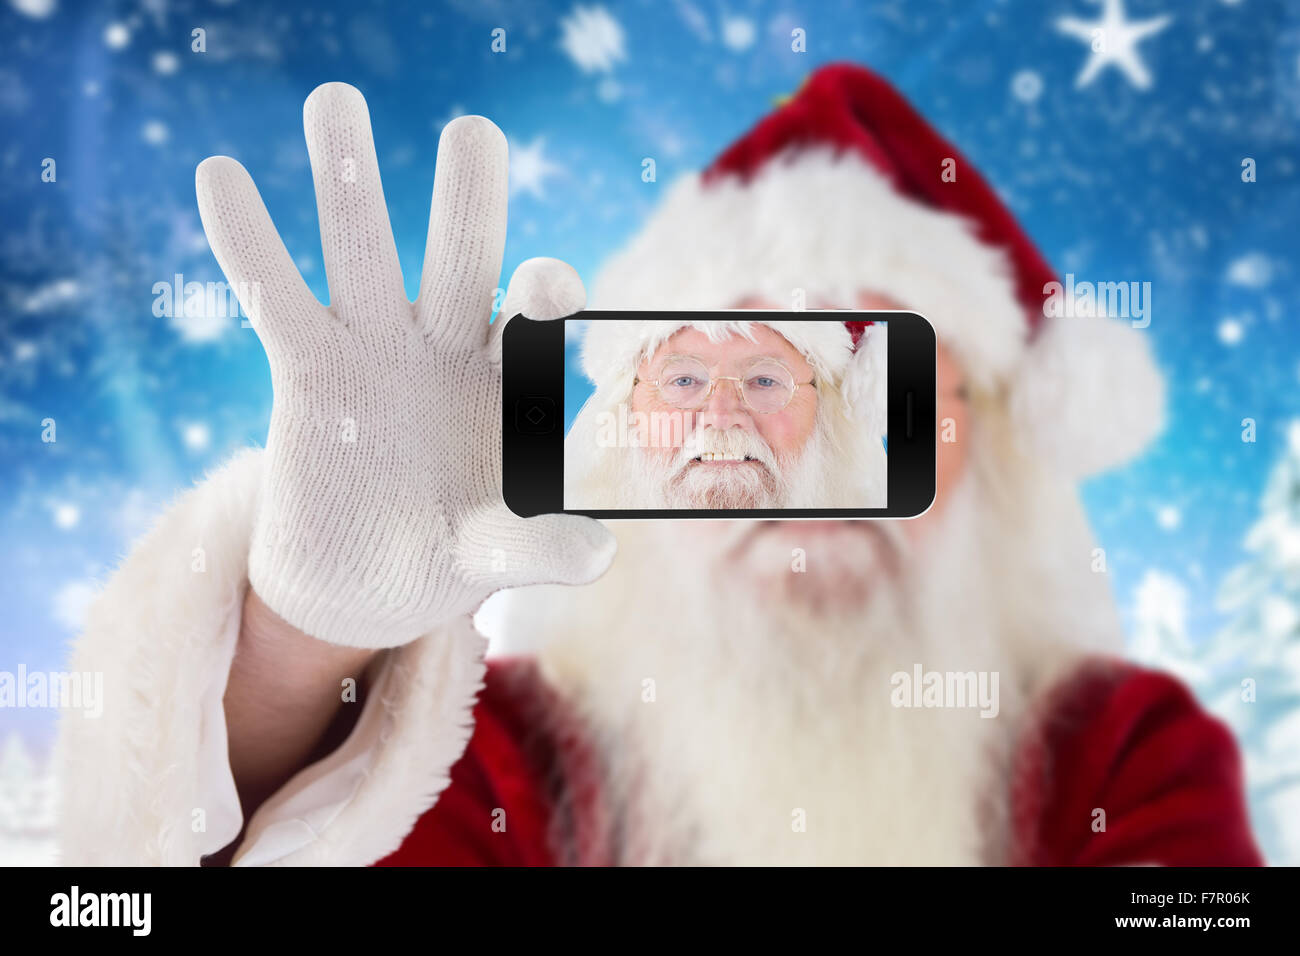 Composite image of hand holding mobile phone Stock Photo